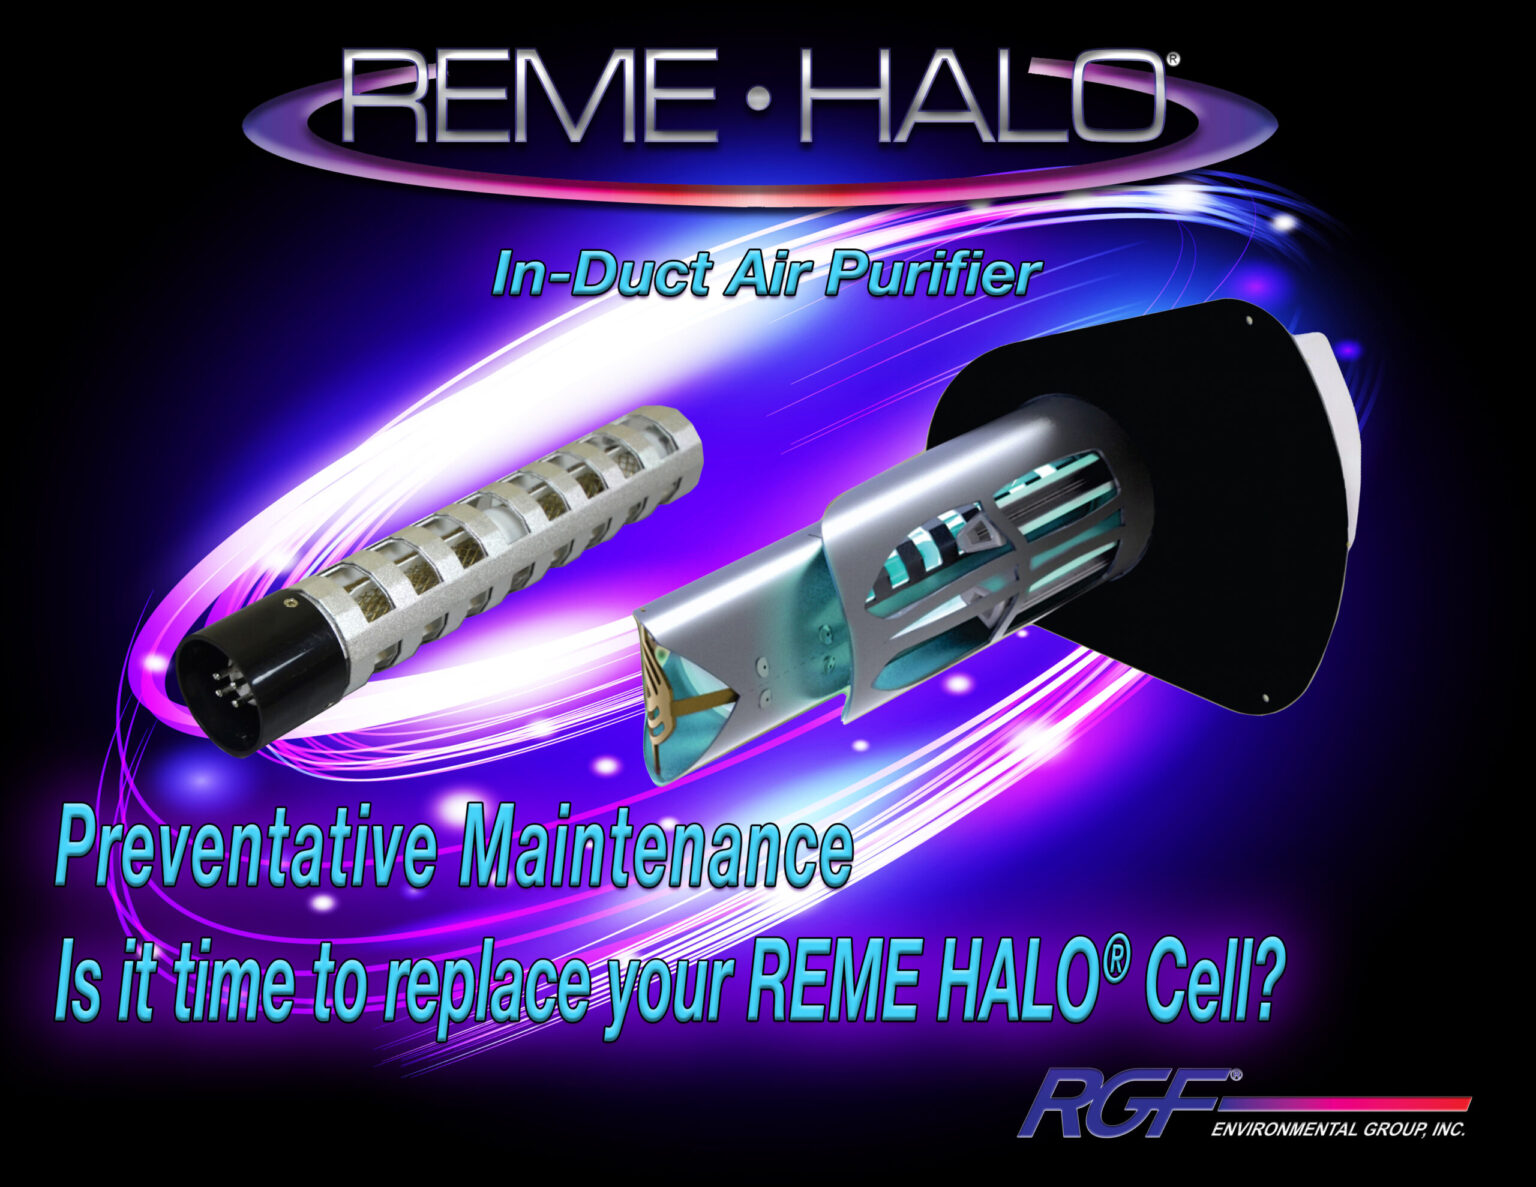 reme halo cell replacement